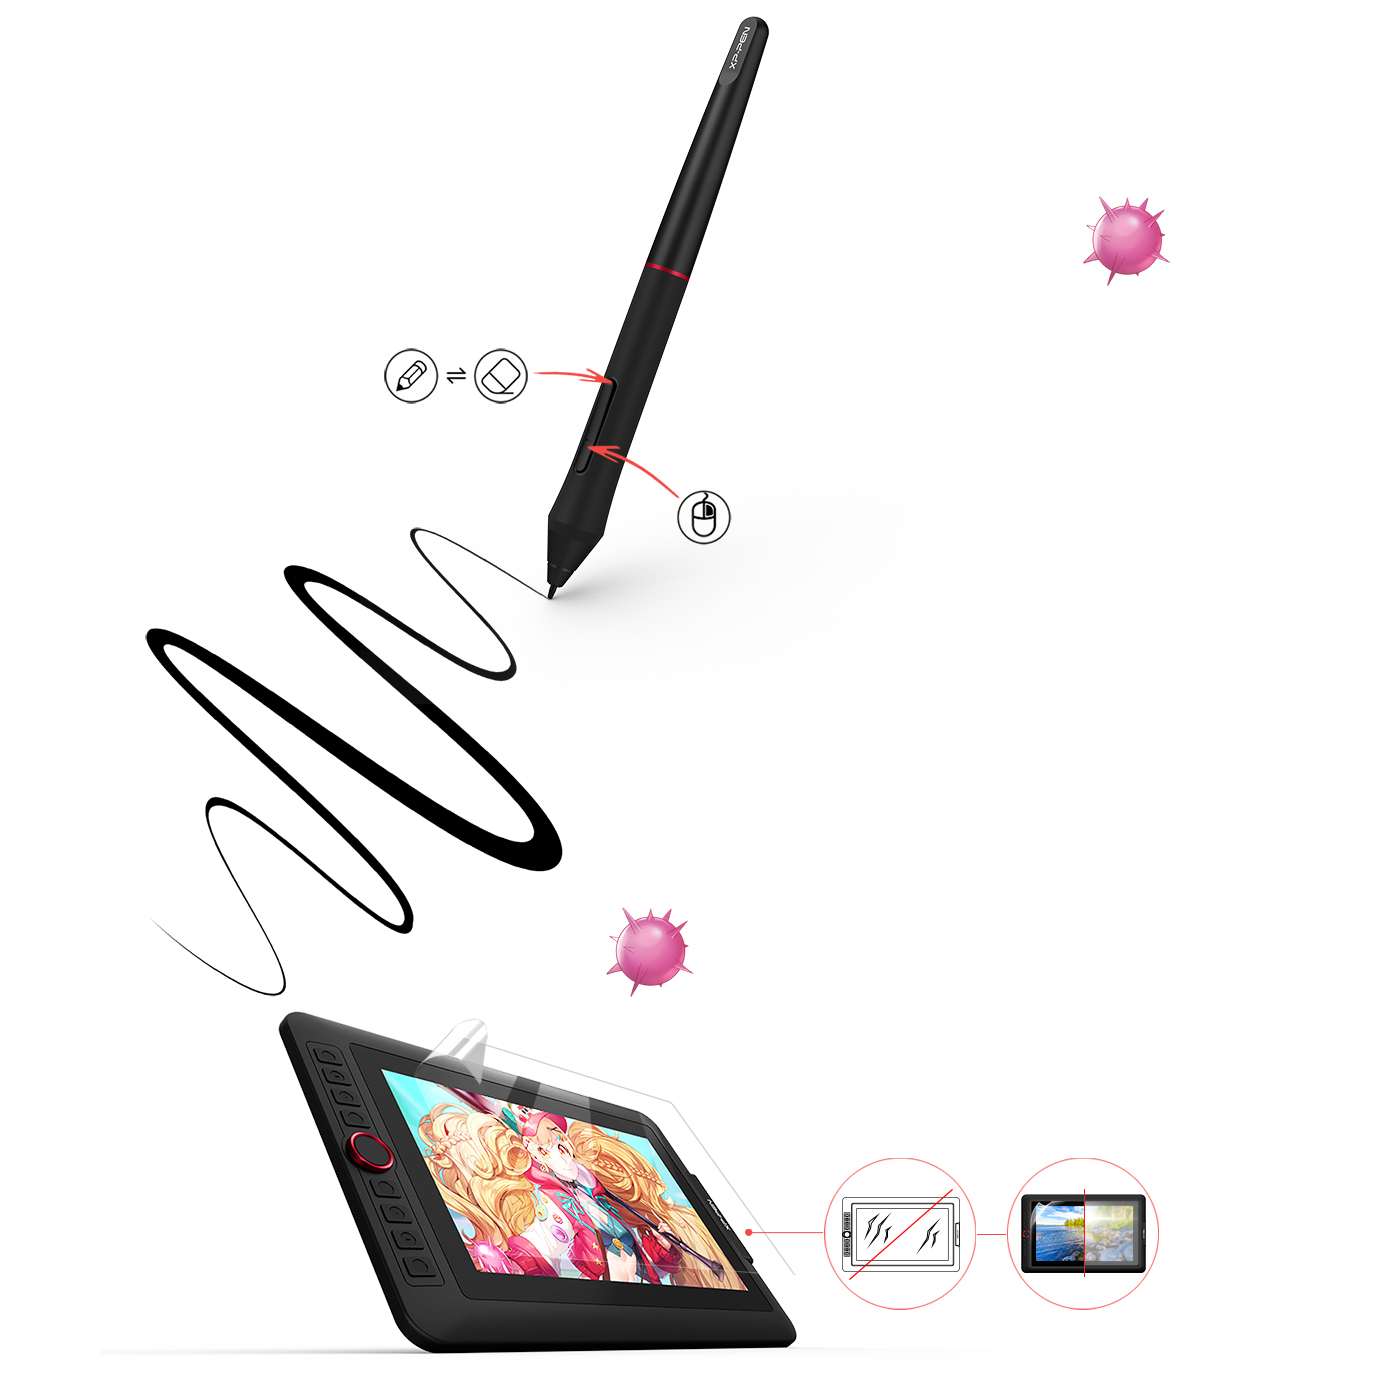 XP-Pen Artist 13.3 Pro computer drawing tablet With up to 8,192 levels of pressure sensitivity